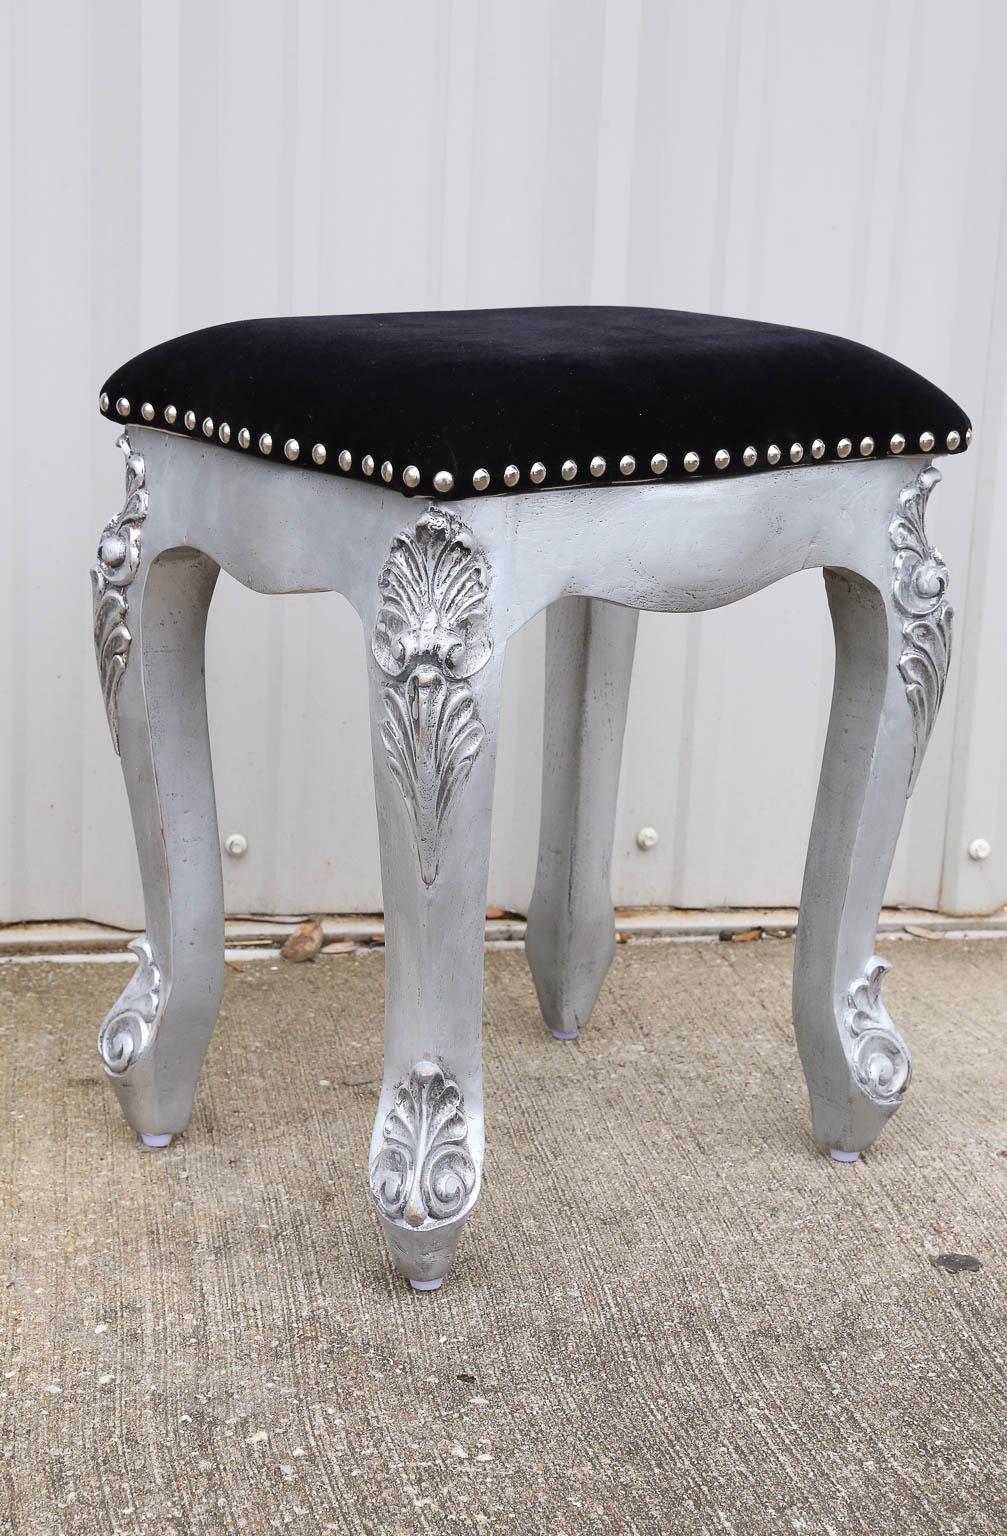 Set of four velvet cushioned solid teak wood queen Ann style stools with silver look paint. Custom made for a house warming ceremony. These are comfortable to sit and easy to move around. These will light up any family room.
Each $ 405.00
Set of